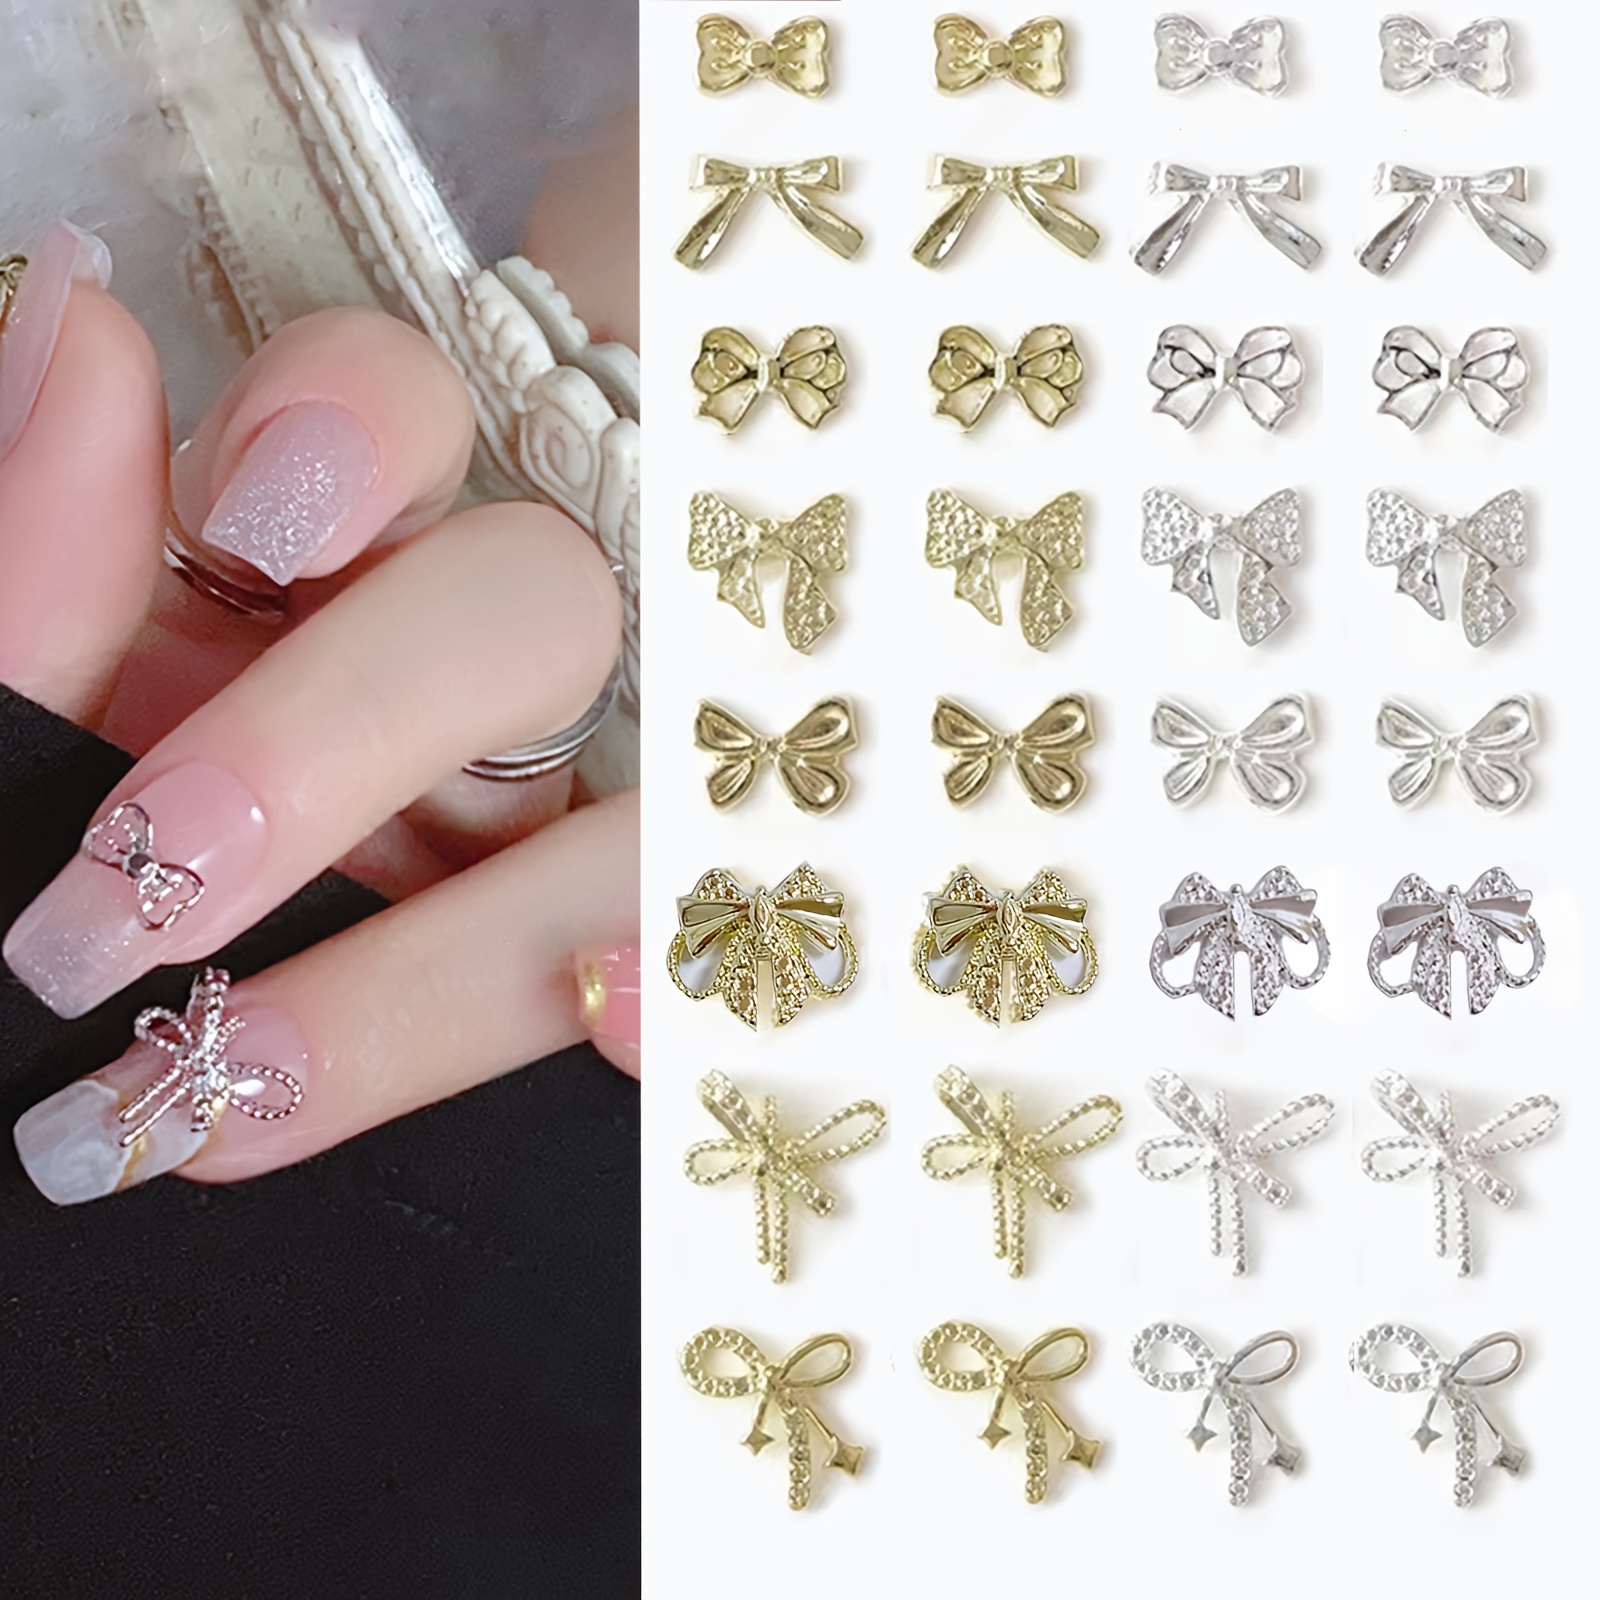 ONEUPIN 24pcs 3D Alloy Heart Nail Charms, 3 Styles Gold Nail Charms for Acrylic Nails in Half Heart Shape, Nail Rhinestones Accessories Jewelry for Women